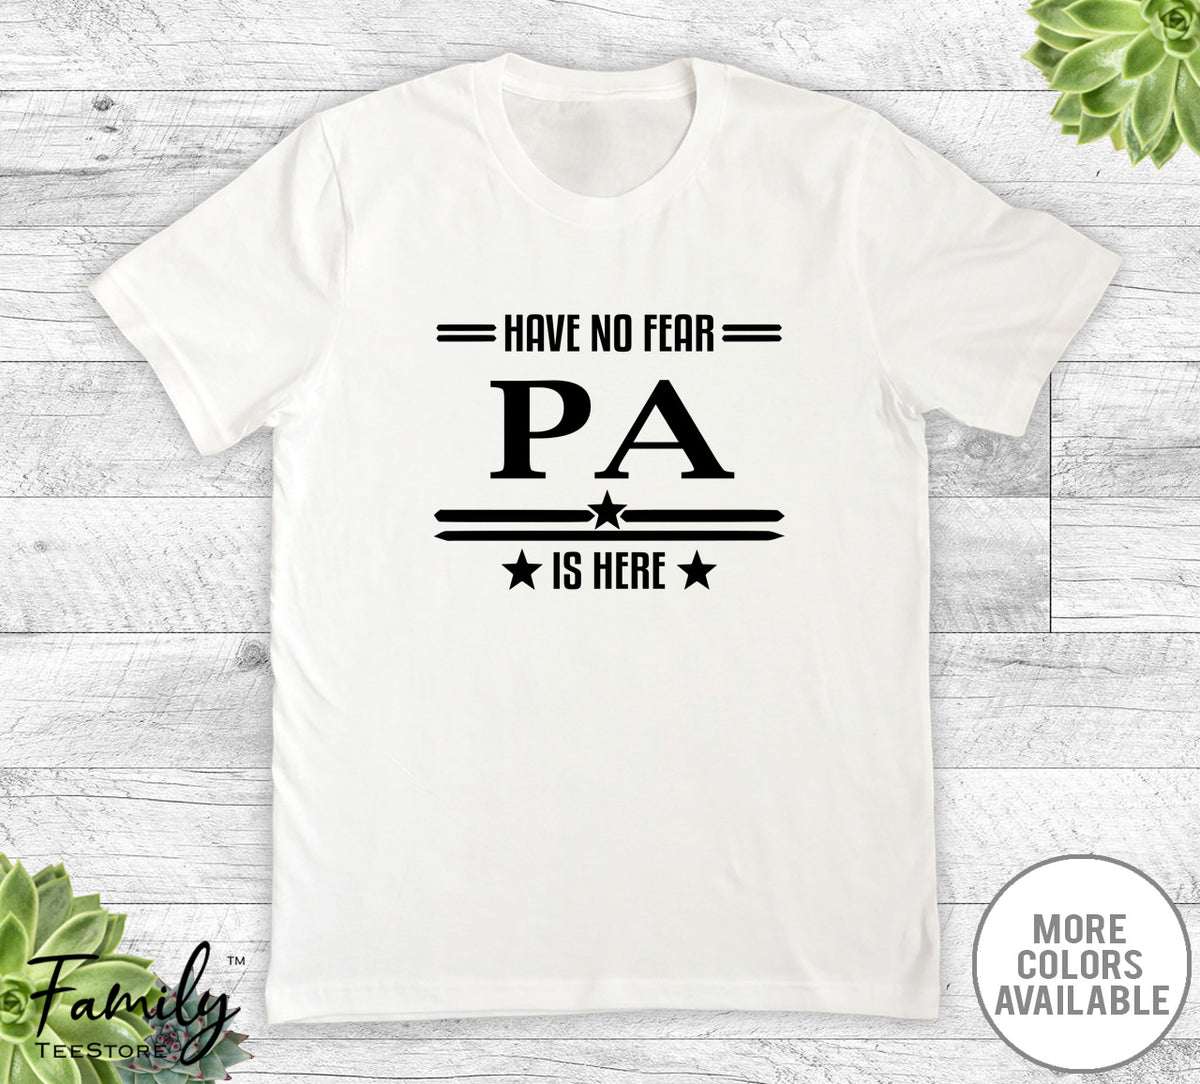 Have No Fear Pa Is Here - Unisex T-shirt - Pa Shirt - Pa Gift